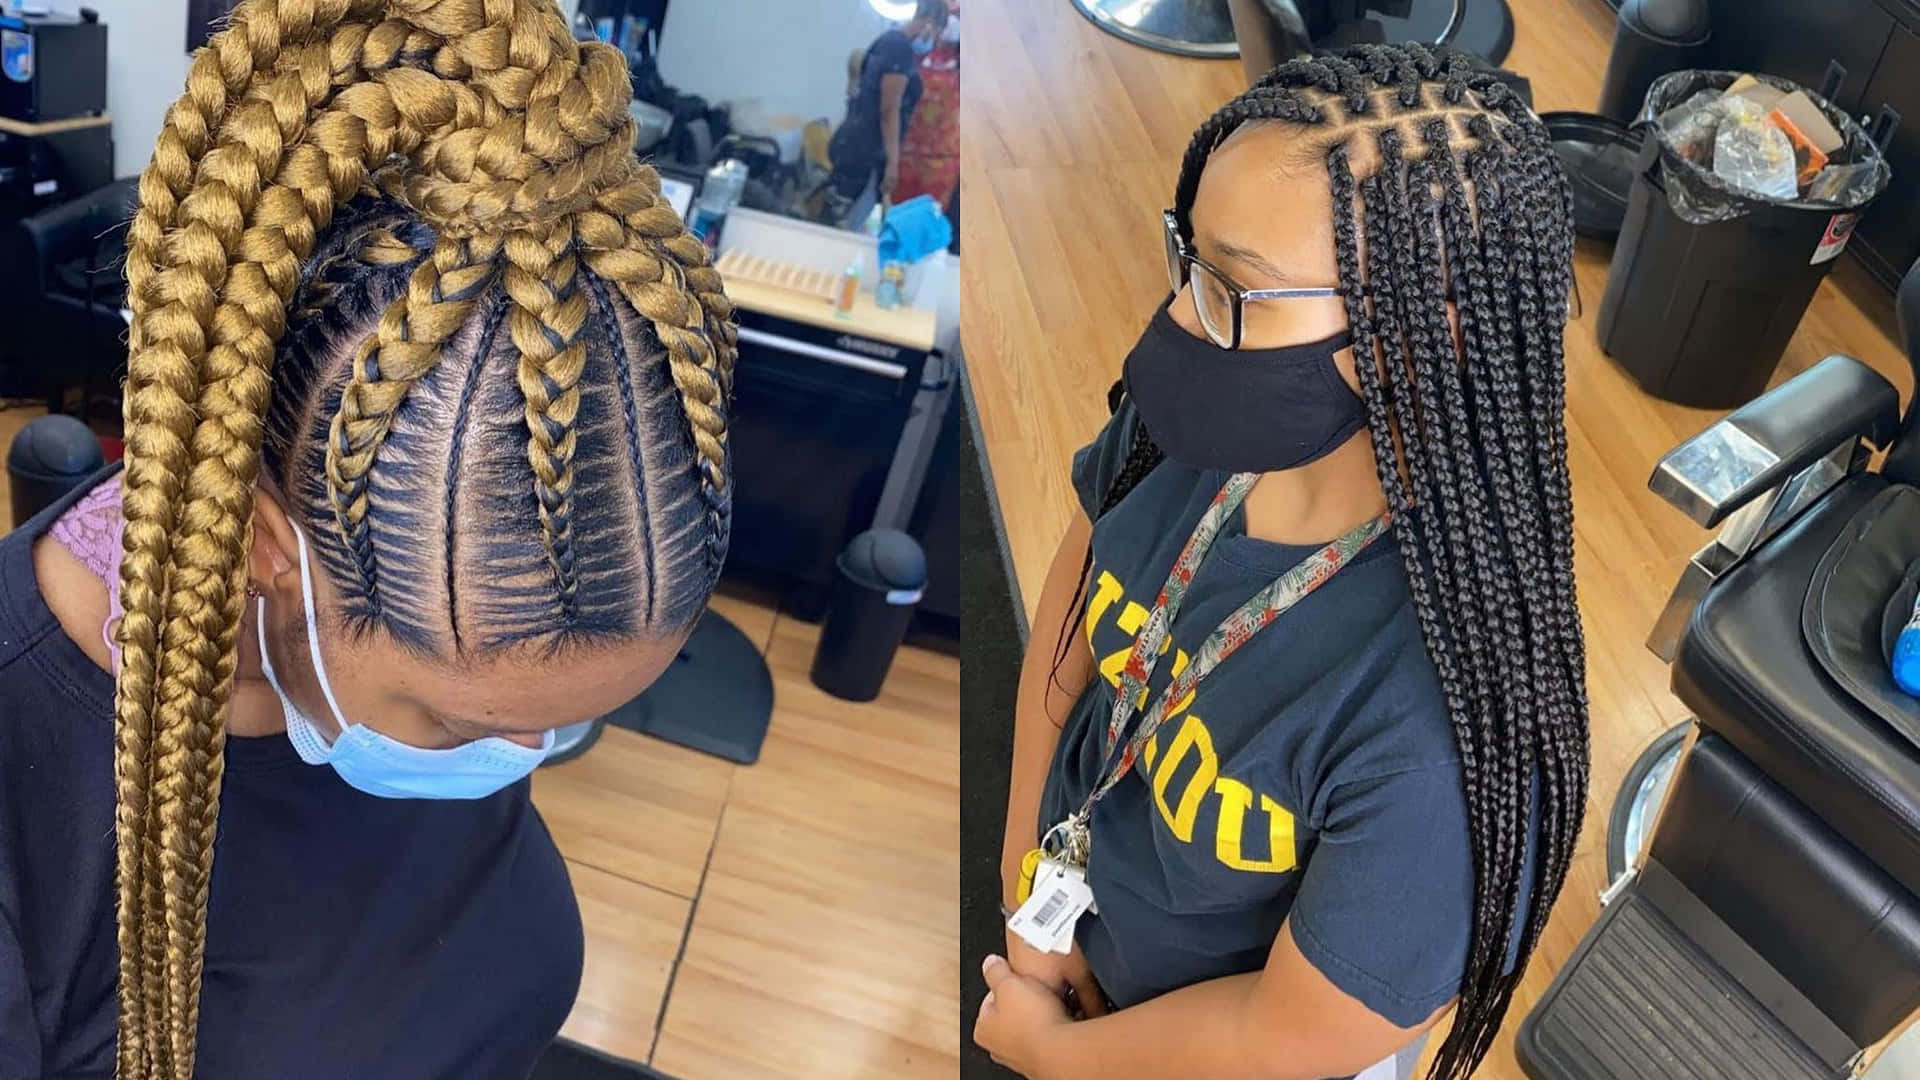 Two Pictures Of A Woman With Braids In Her Hair